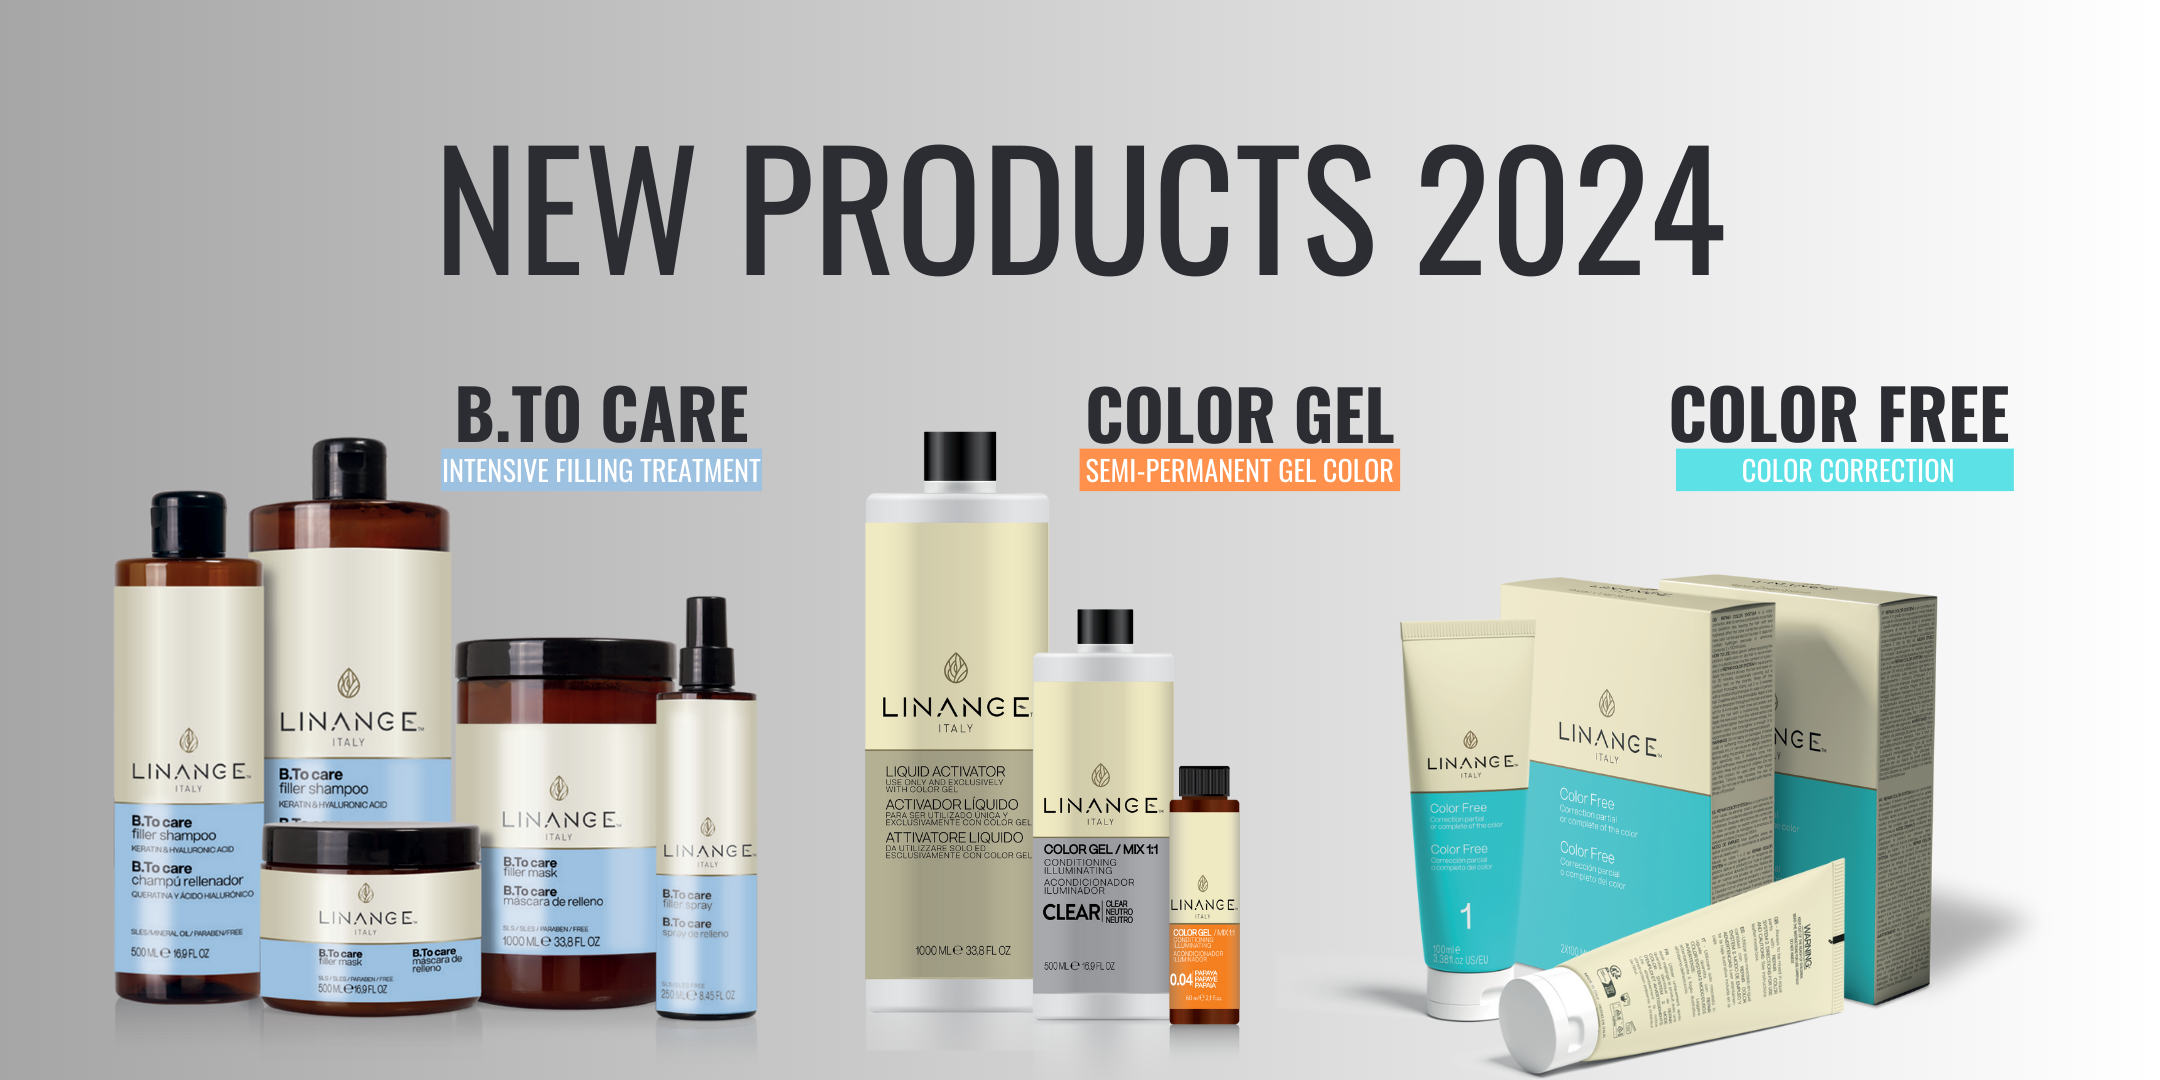 Linange BTO Care, Color Gel and Color Free Lines